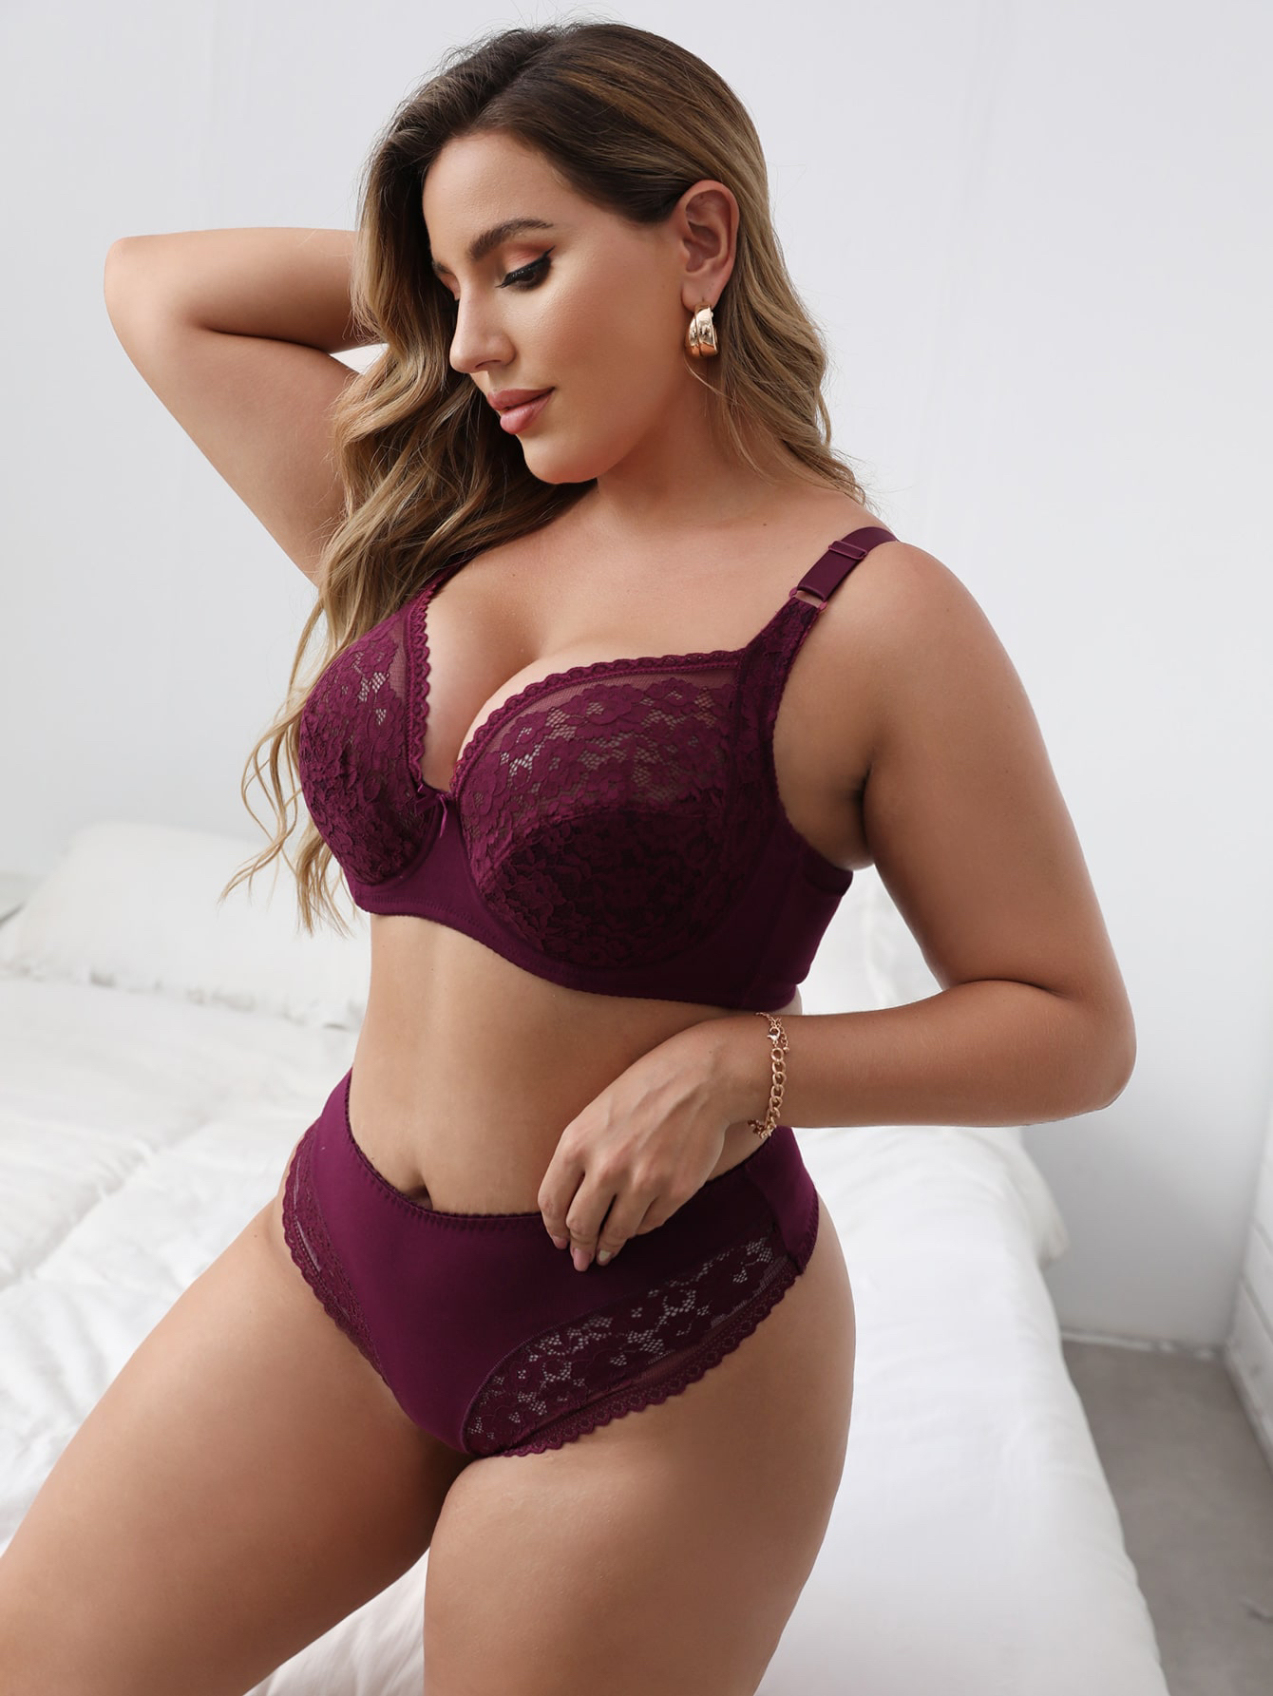 Unpadded Lace Bra With Underwire Support